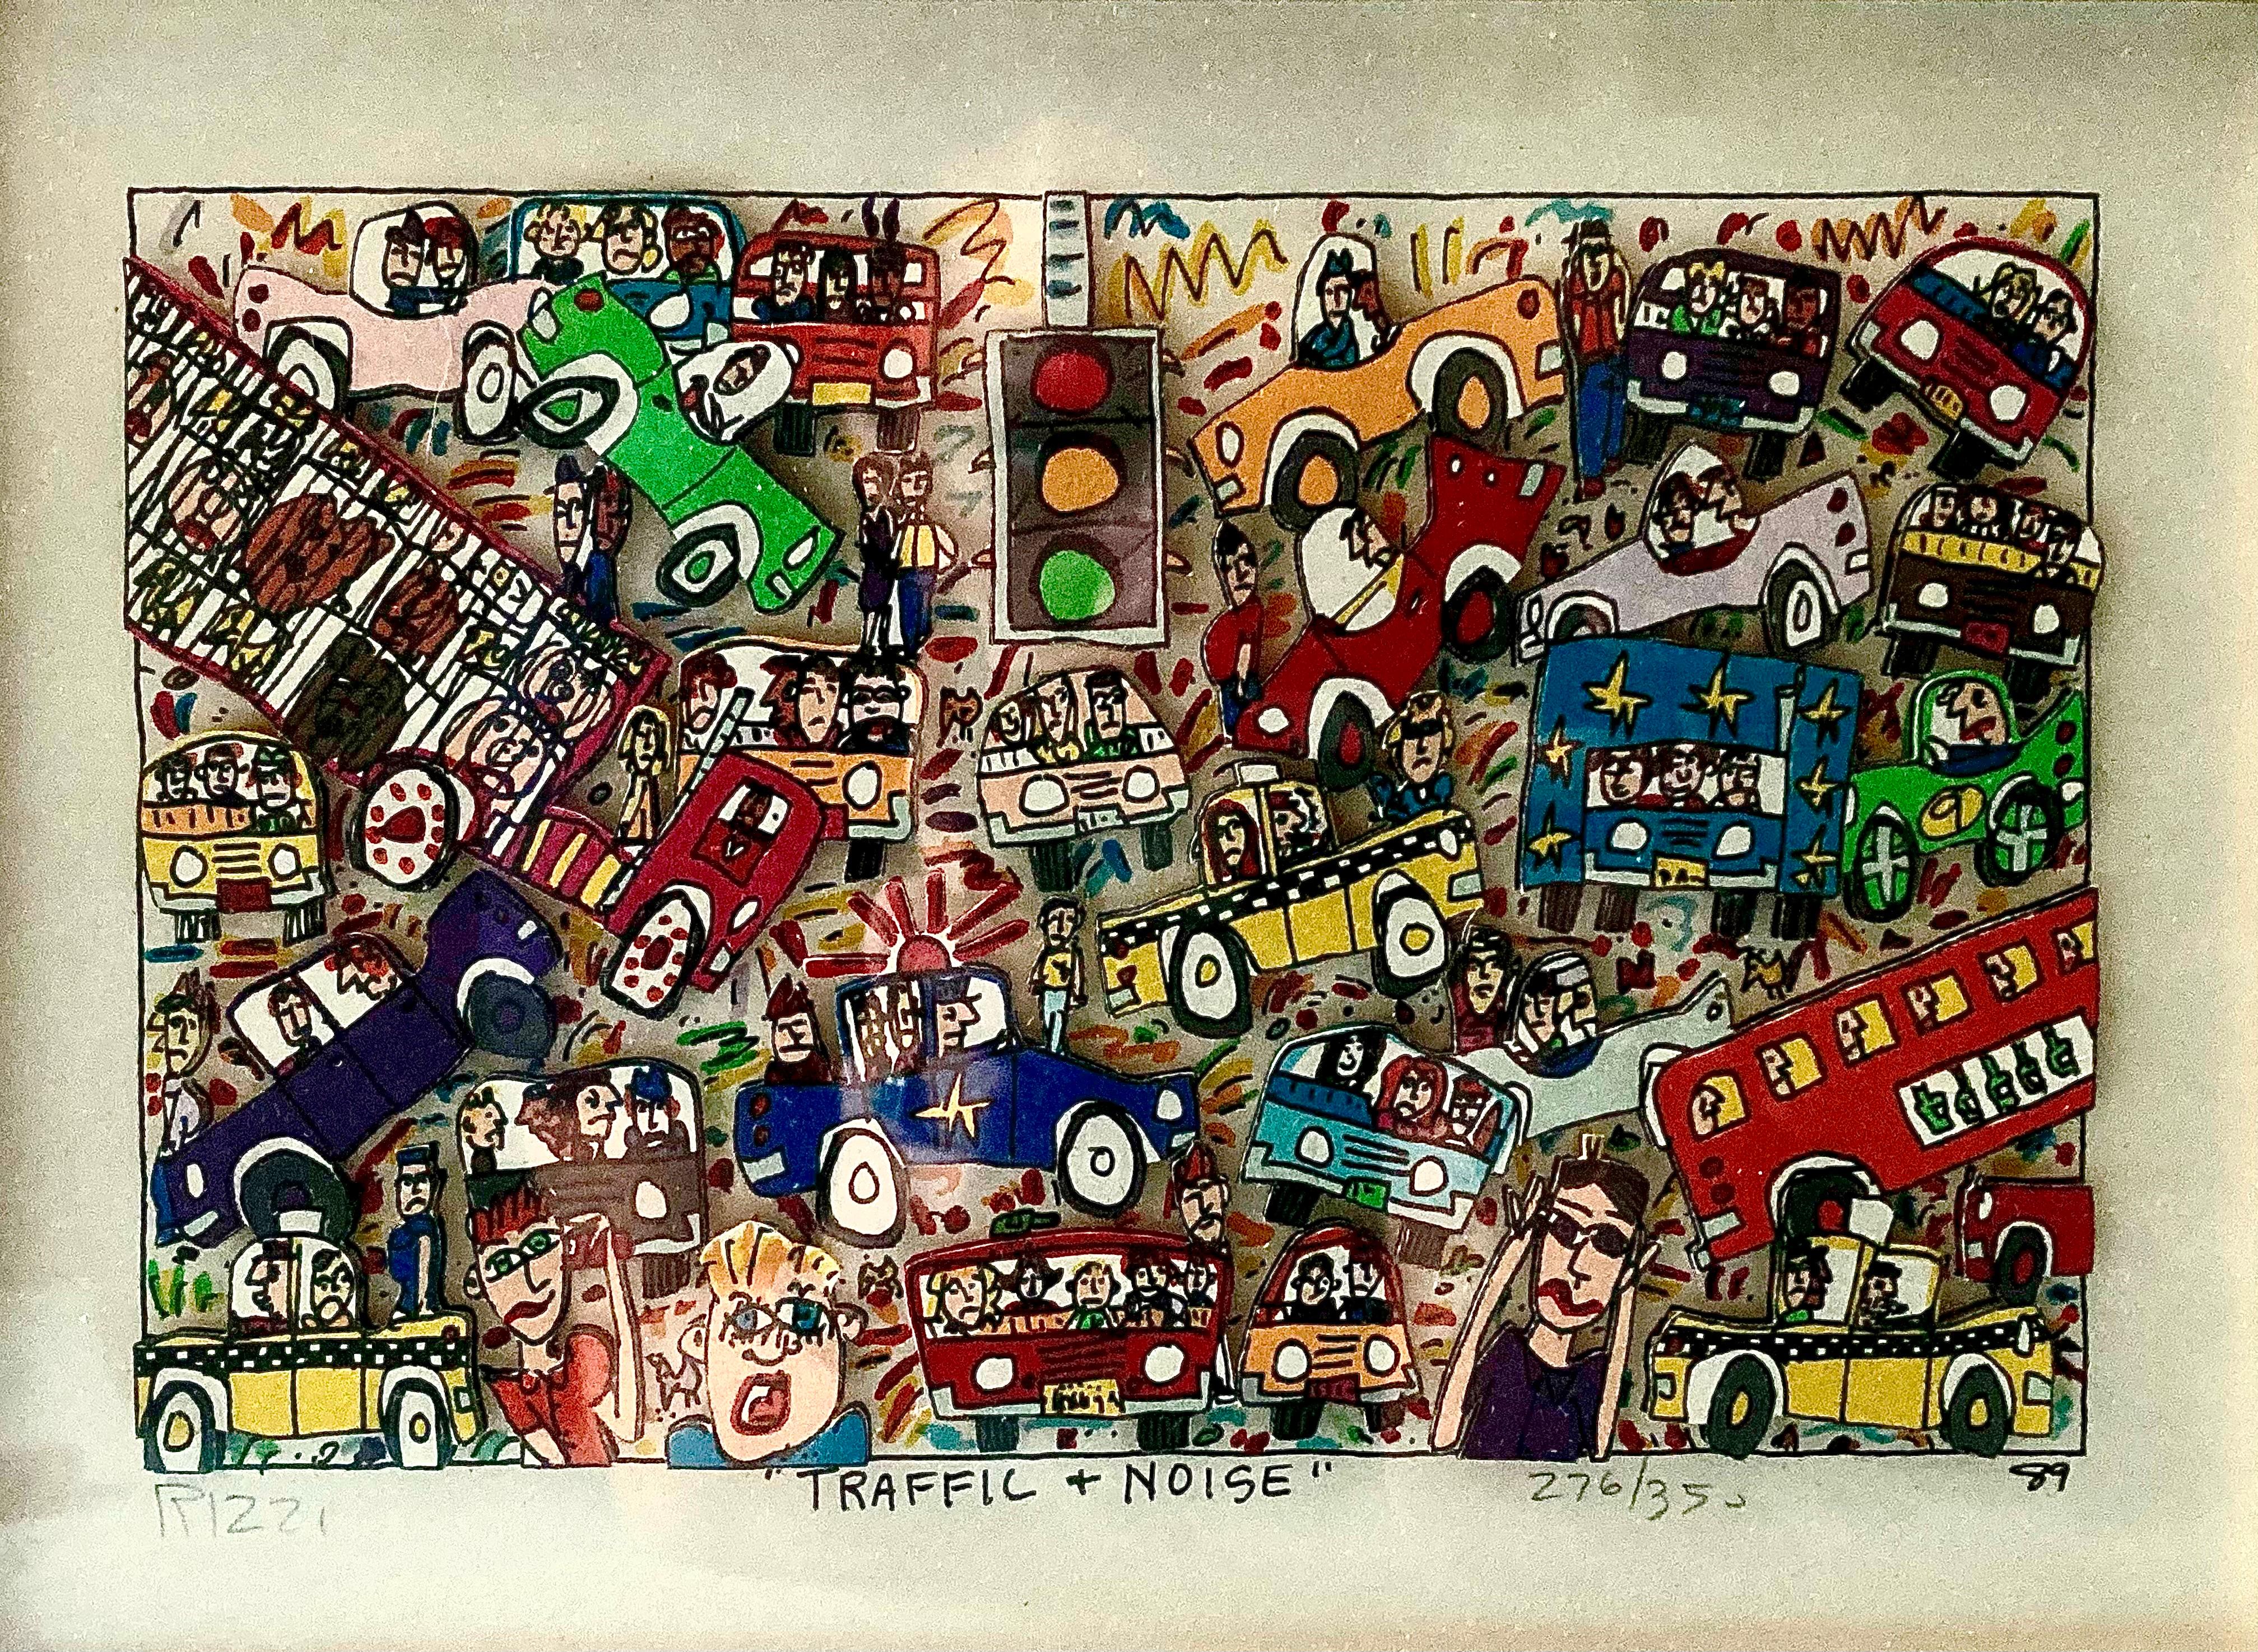 "Traffic and Noise" - Print by James Rizzi